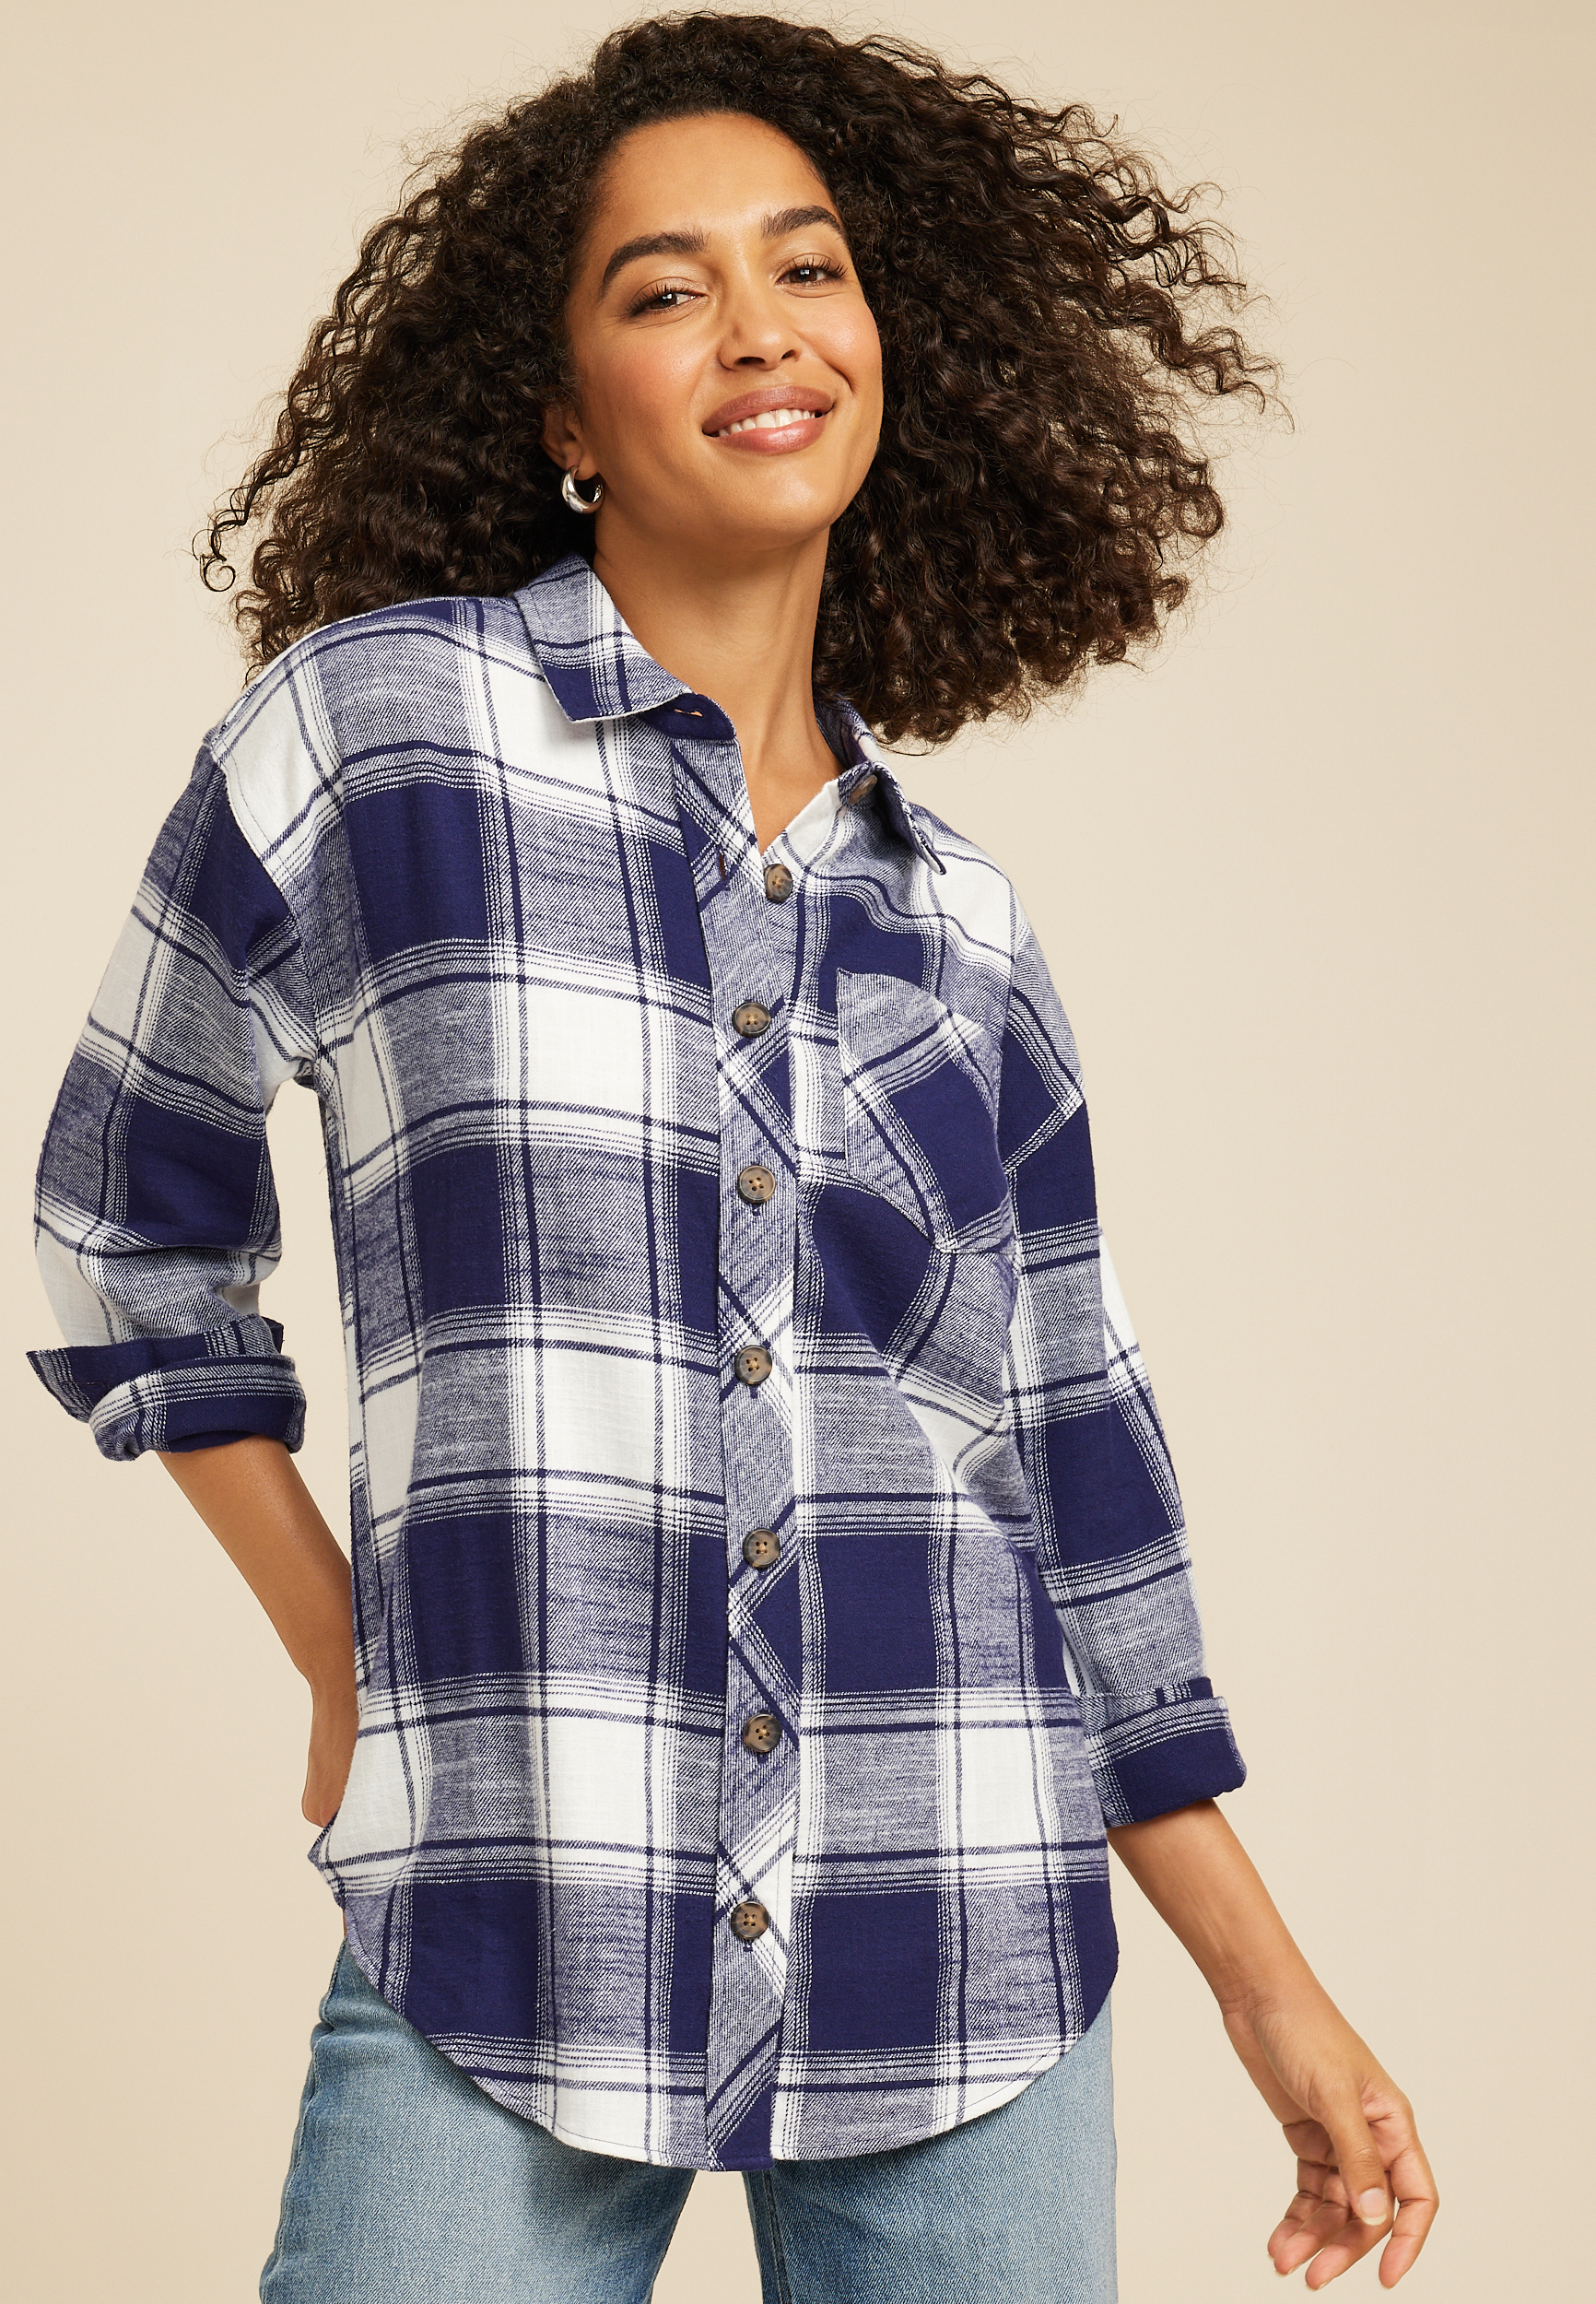 The 15 Best White Button-Down Shirts For Women 2023